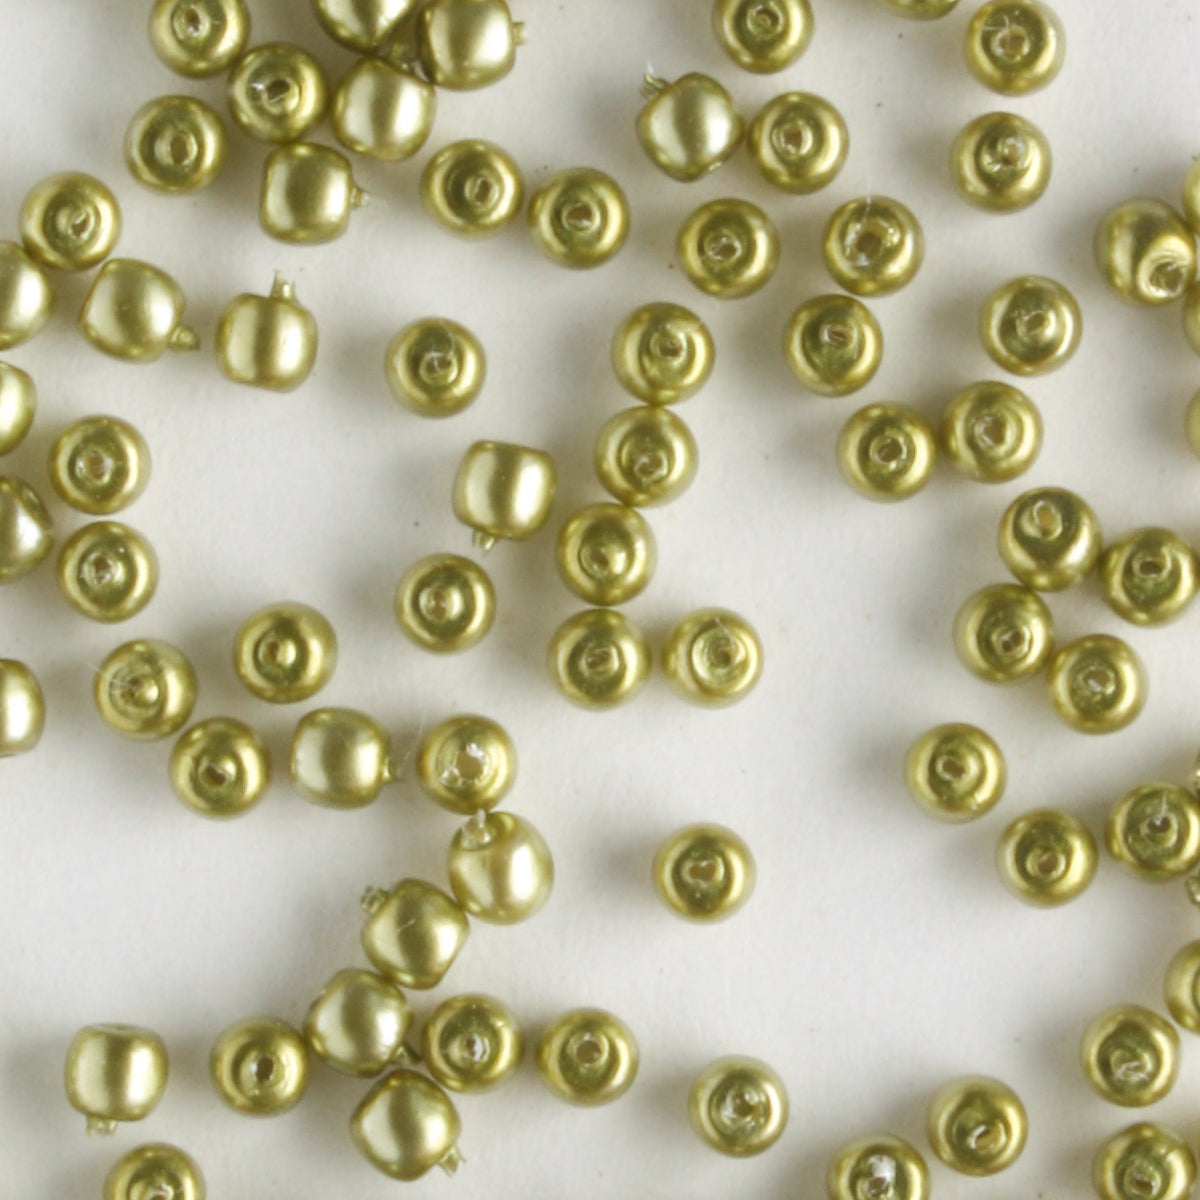 2mm Round Glass Pearls Olive - 100 beads